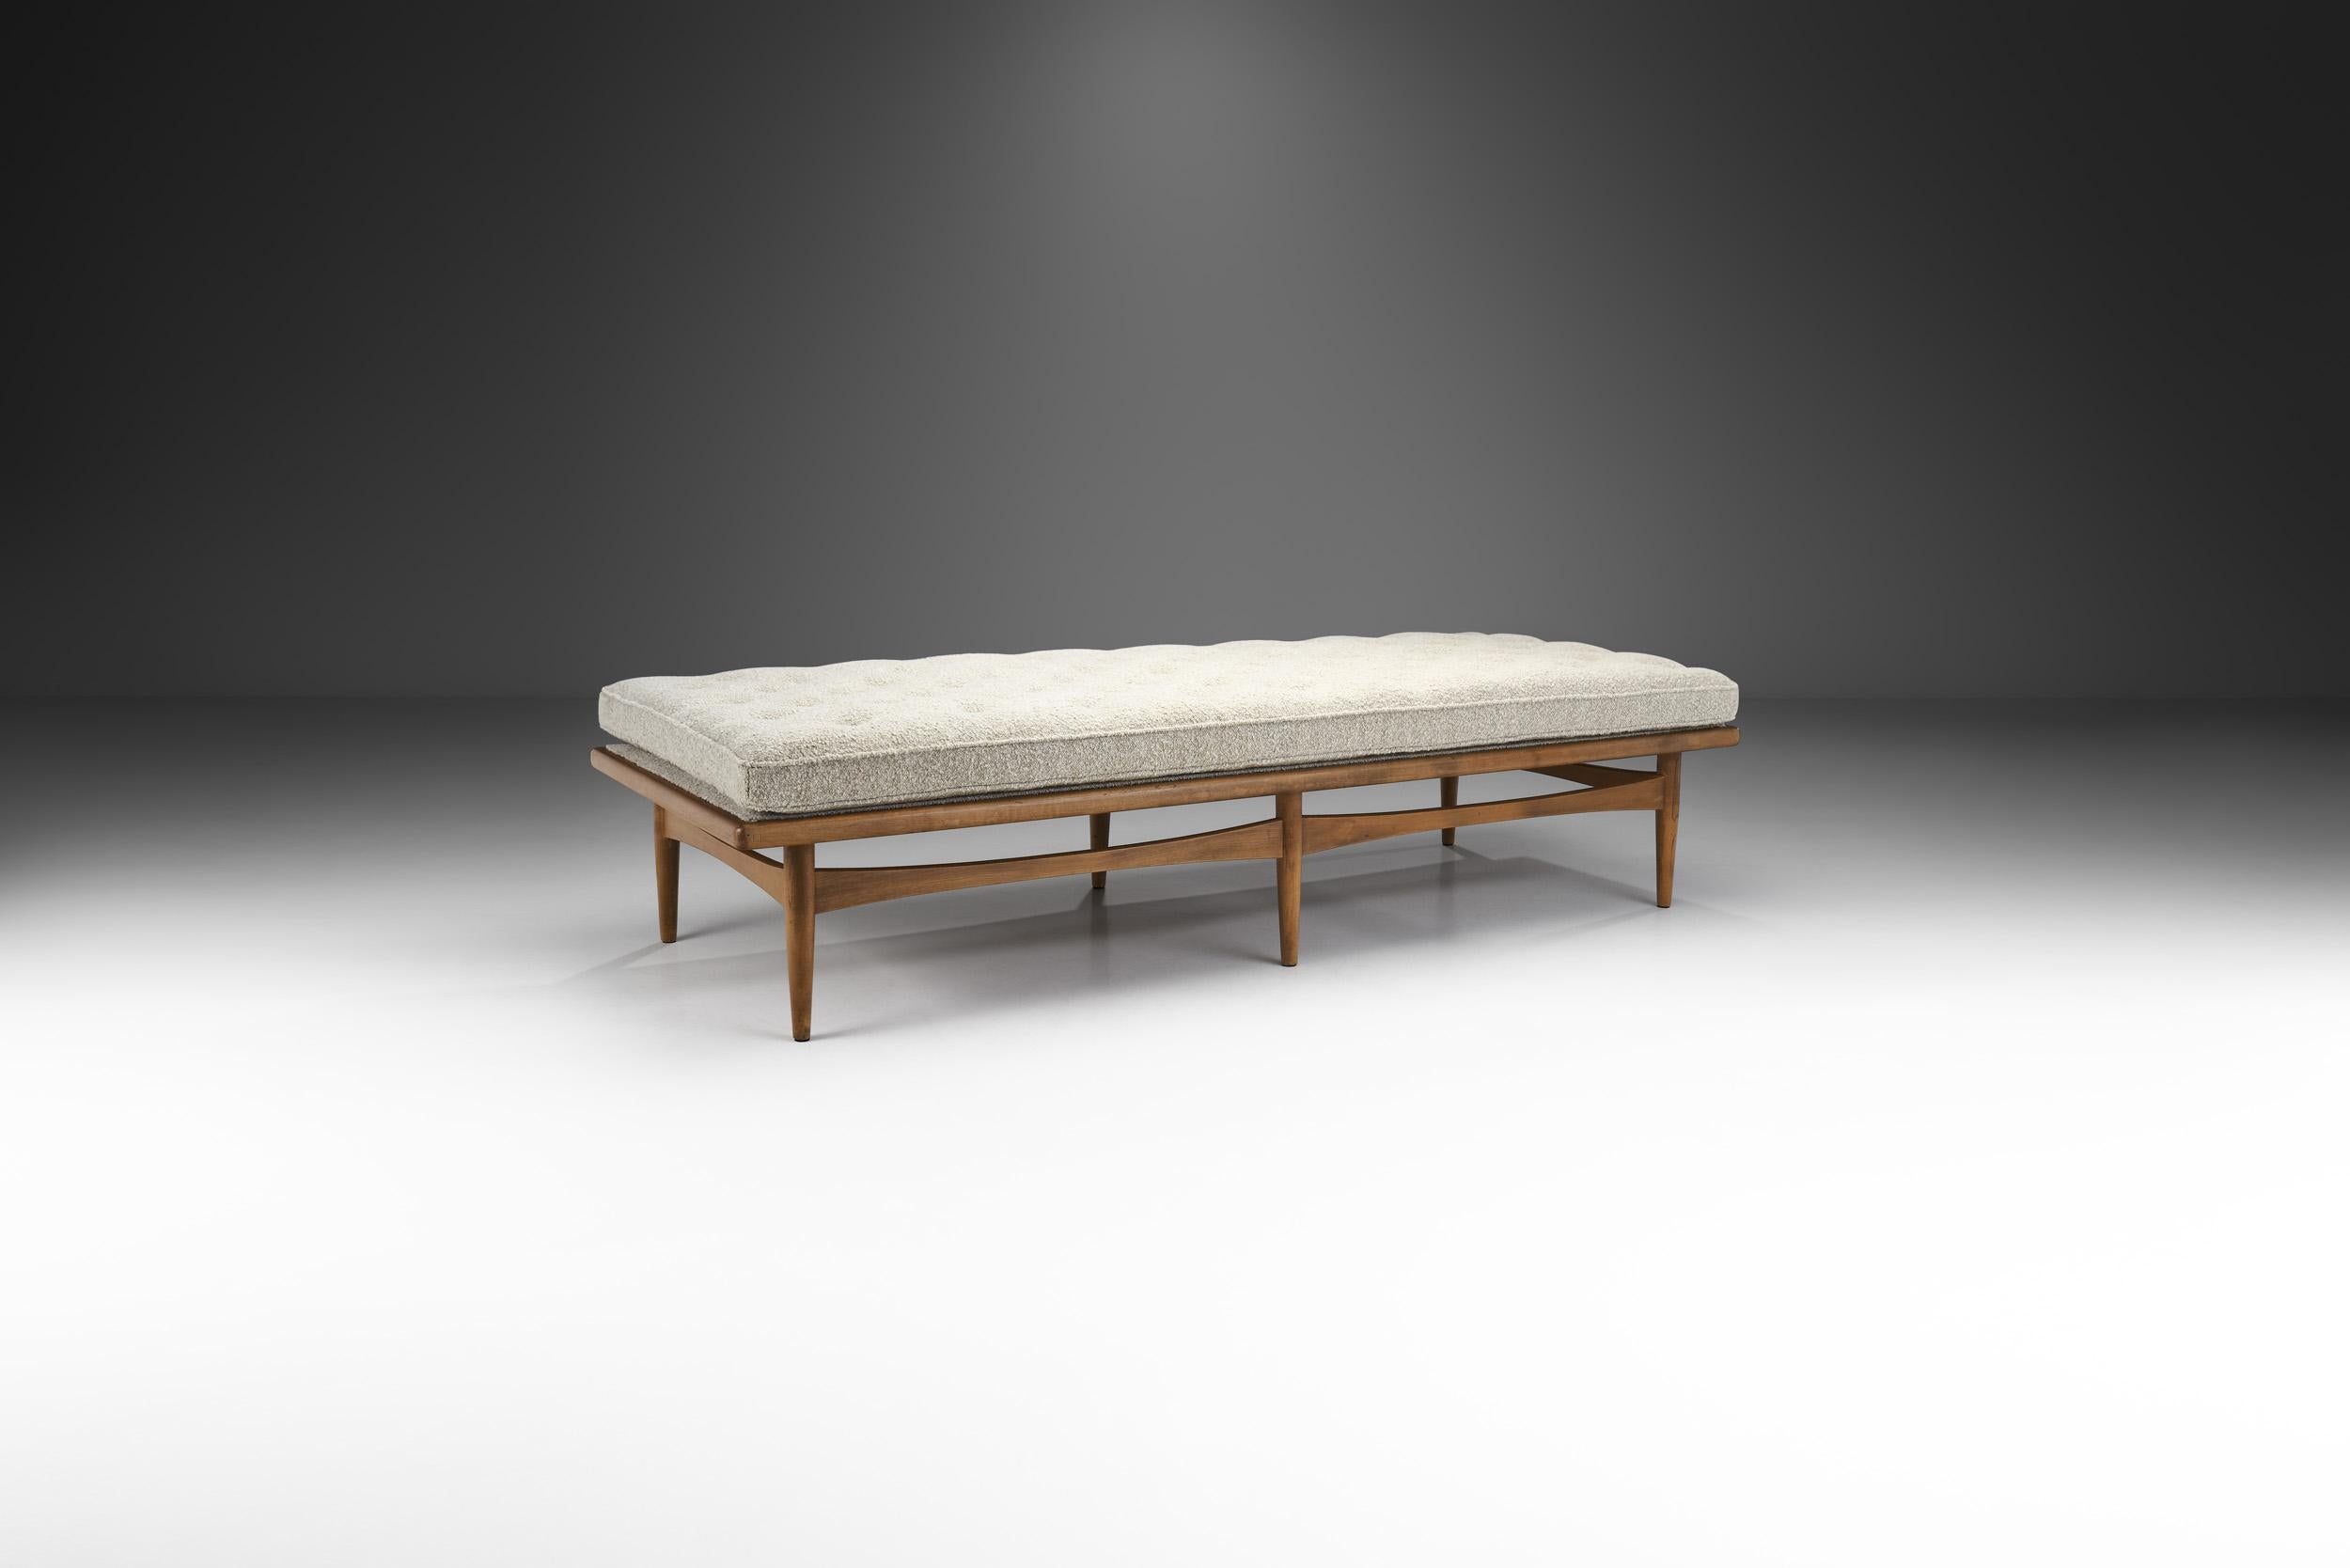 Pieces from the mid-century era, like this daybed, are characterized by clarity in design and extremely high-quality craftsmanship and choice of materials. The perfectly balanced proportions and elegantly sleek structure of this model make it a